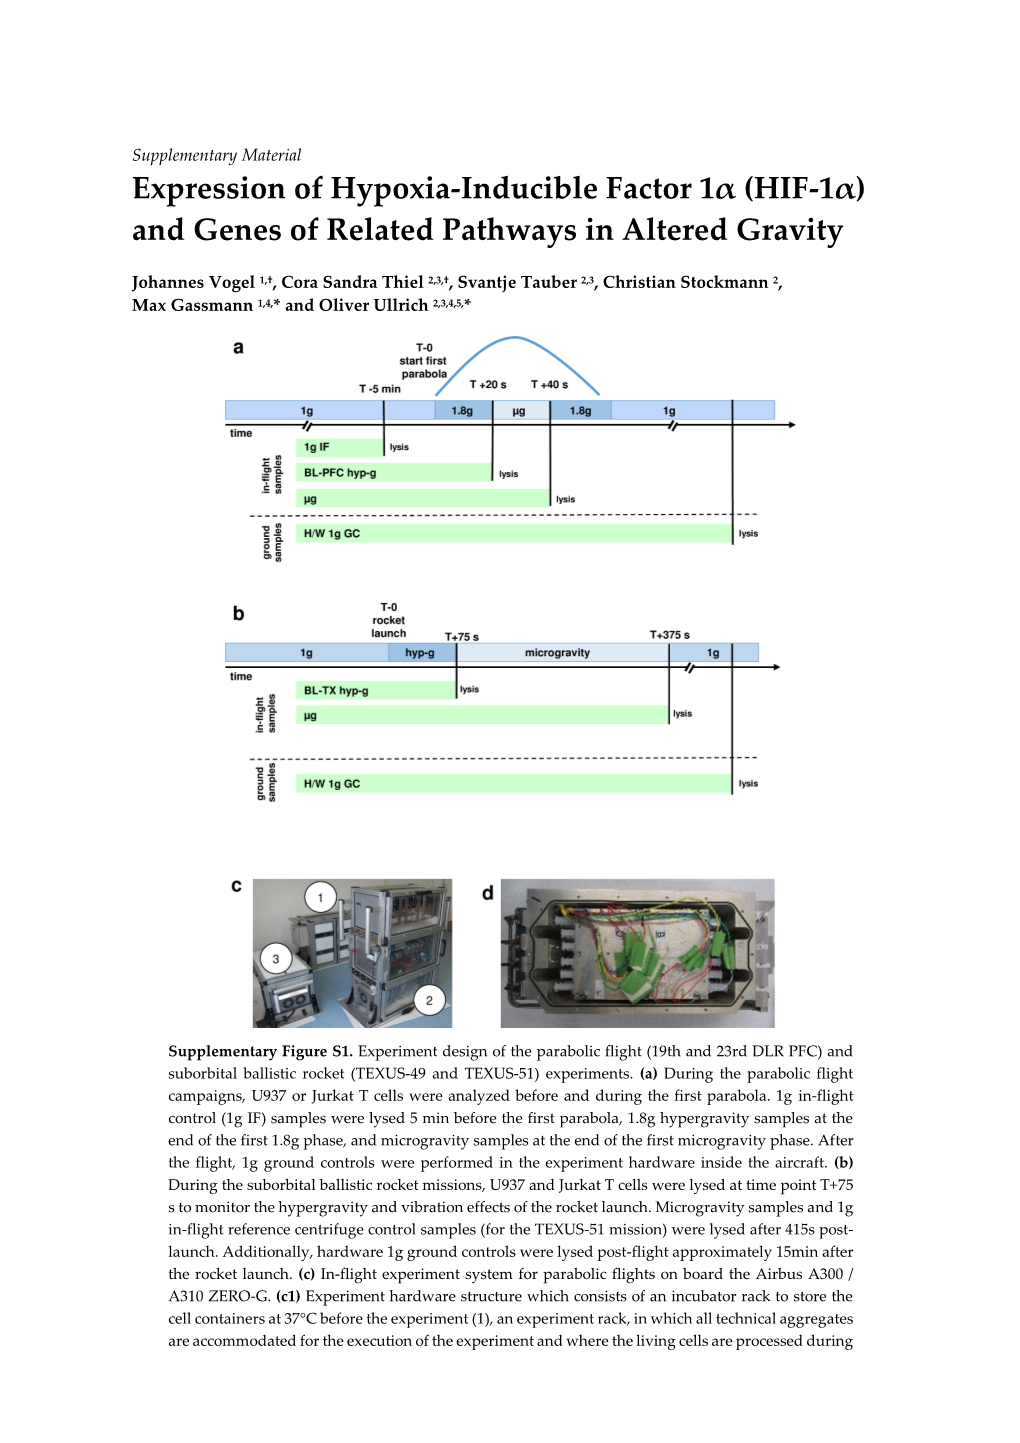 And Genes of Related Pathways in Altered Gravity